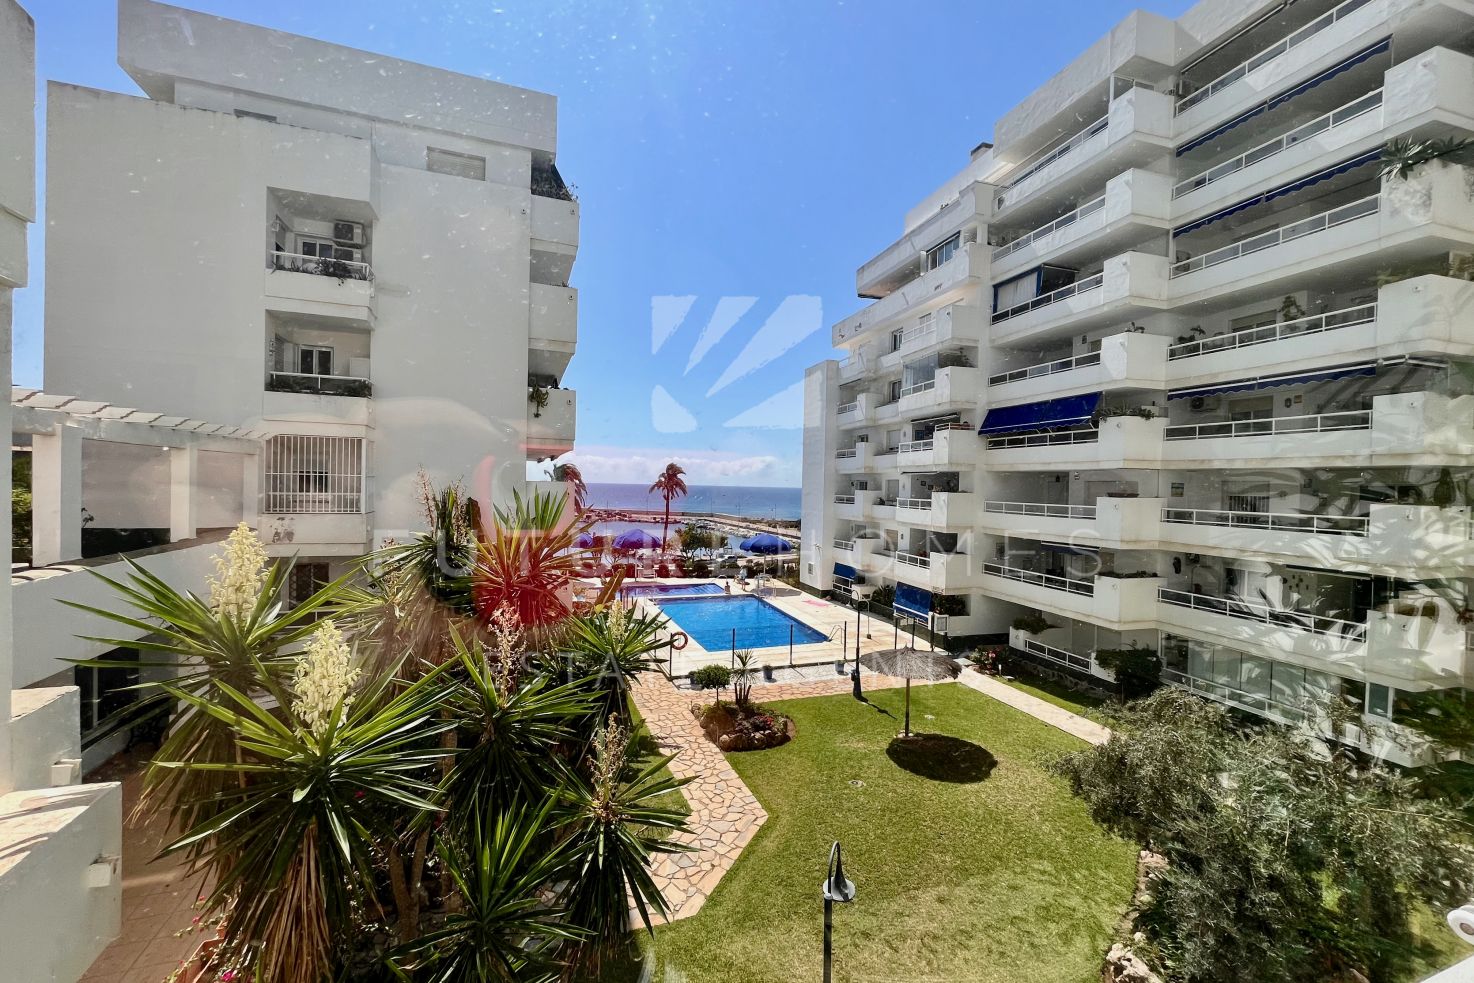 Immaculate apartment located next to Estepona port with private underground parking included.